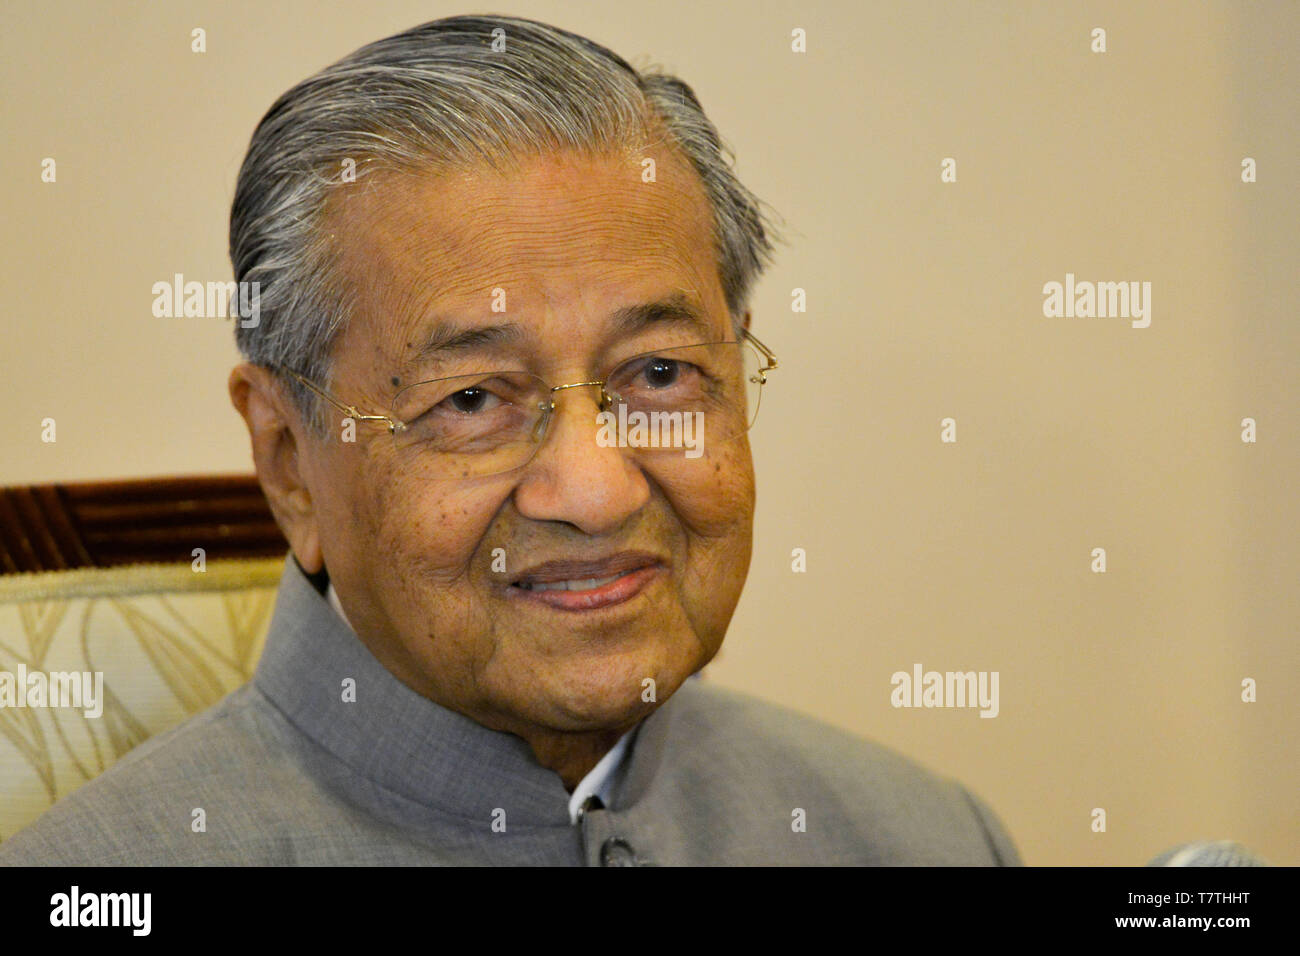 (190509) -- PUTRAJAYA, May 9, 2019 (Xinhua) -- Malaysian Prime Minister Mahathir Mohamad attends a press conference to mark the first year since his Pakatan Harapan (PH) coalition won power at the national polls on May 9 last year,  in Putrajaya, Malaysia, May 9, 2019. Malaysia has achieved progress in combating corruption and in restoring government institutions after taking over the government in a smooth transition but much remains to be done especially in repairing the national economy, Malaysian Prime Minister Mahathir Mohamad said on Thursday. (Xinhua/Chong Voon Chung) Stock Photo